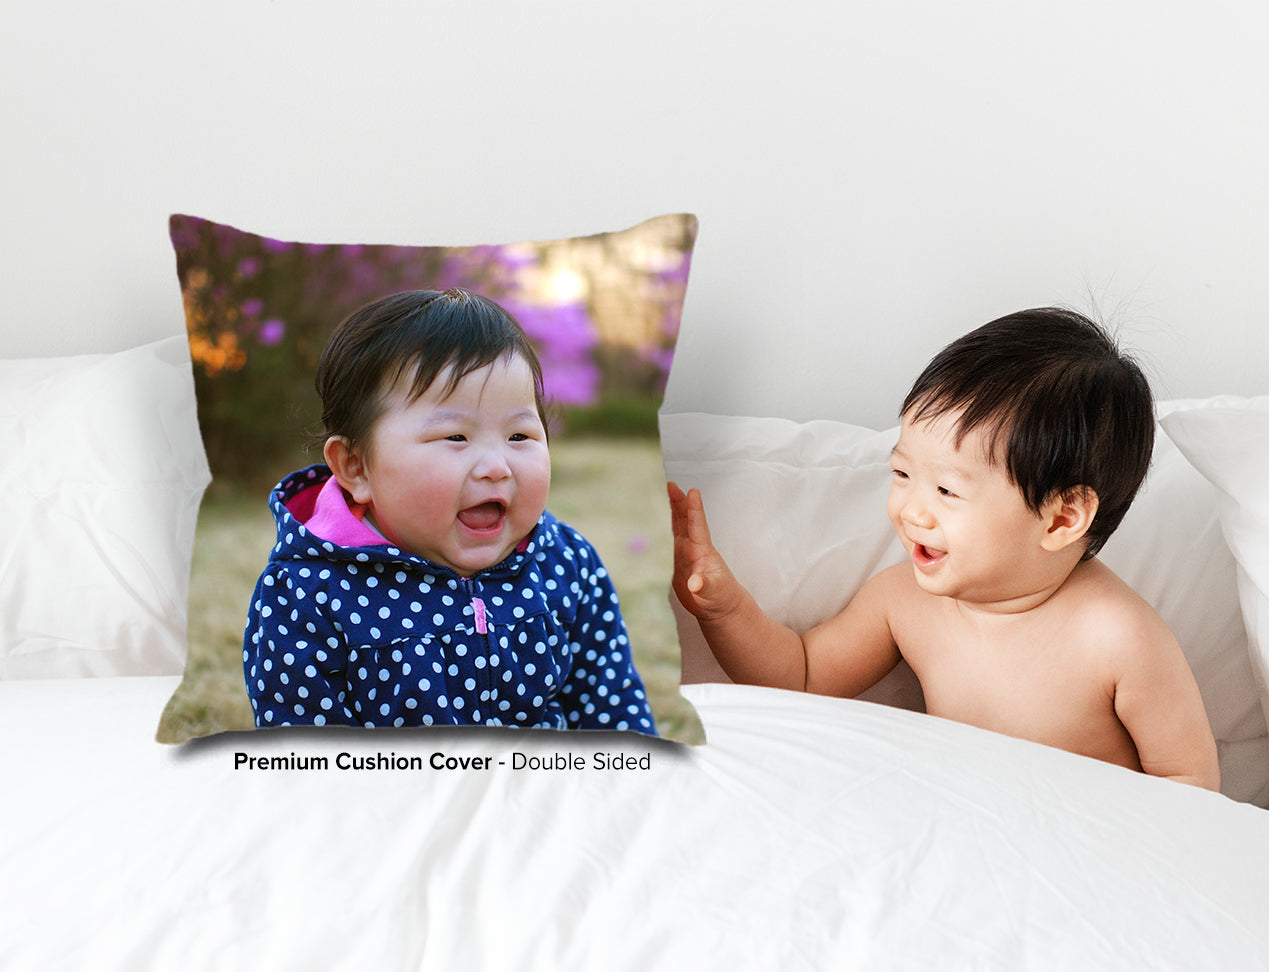 Kid laughing at seeing his own photo on cushion cover